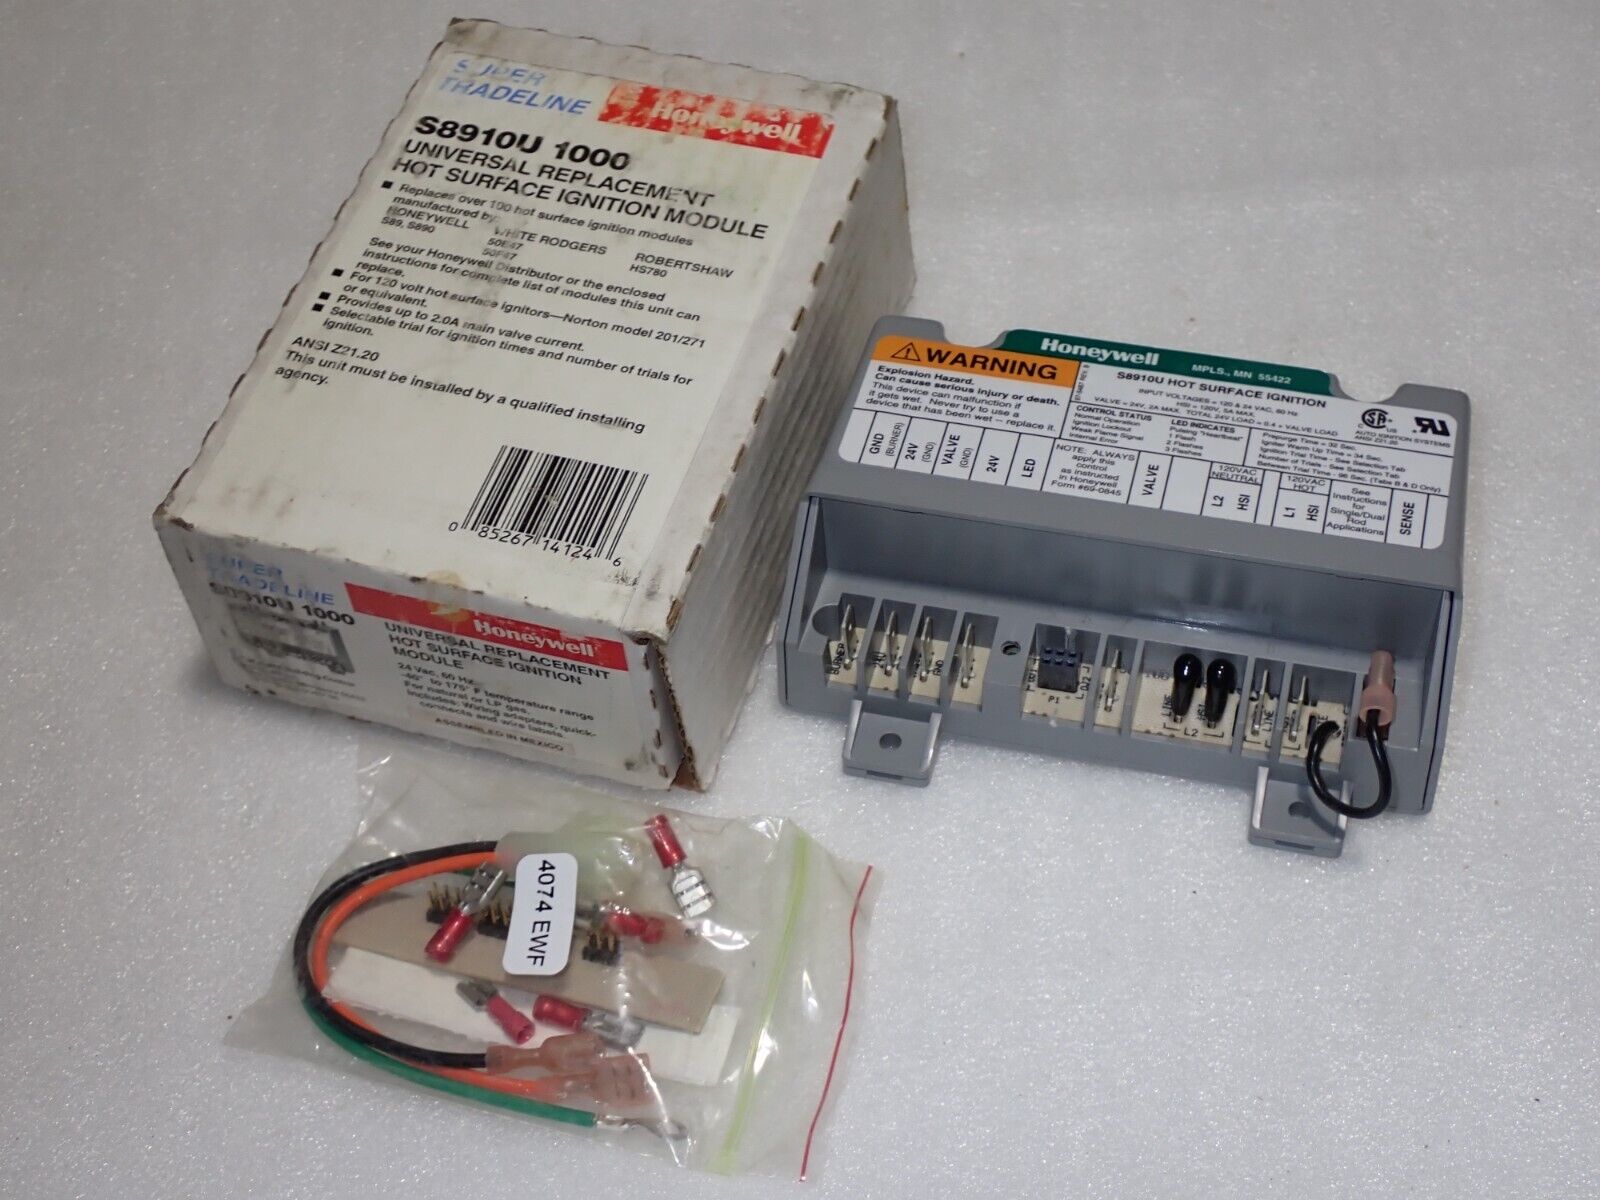 Honeywell S8910U1000 Universal Replacement Hot Surface Ignition Module